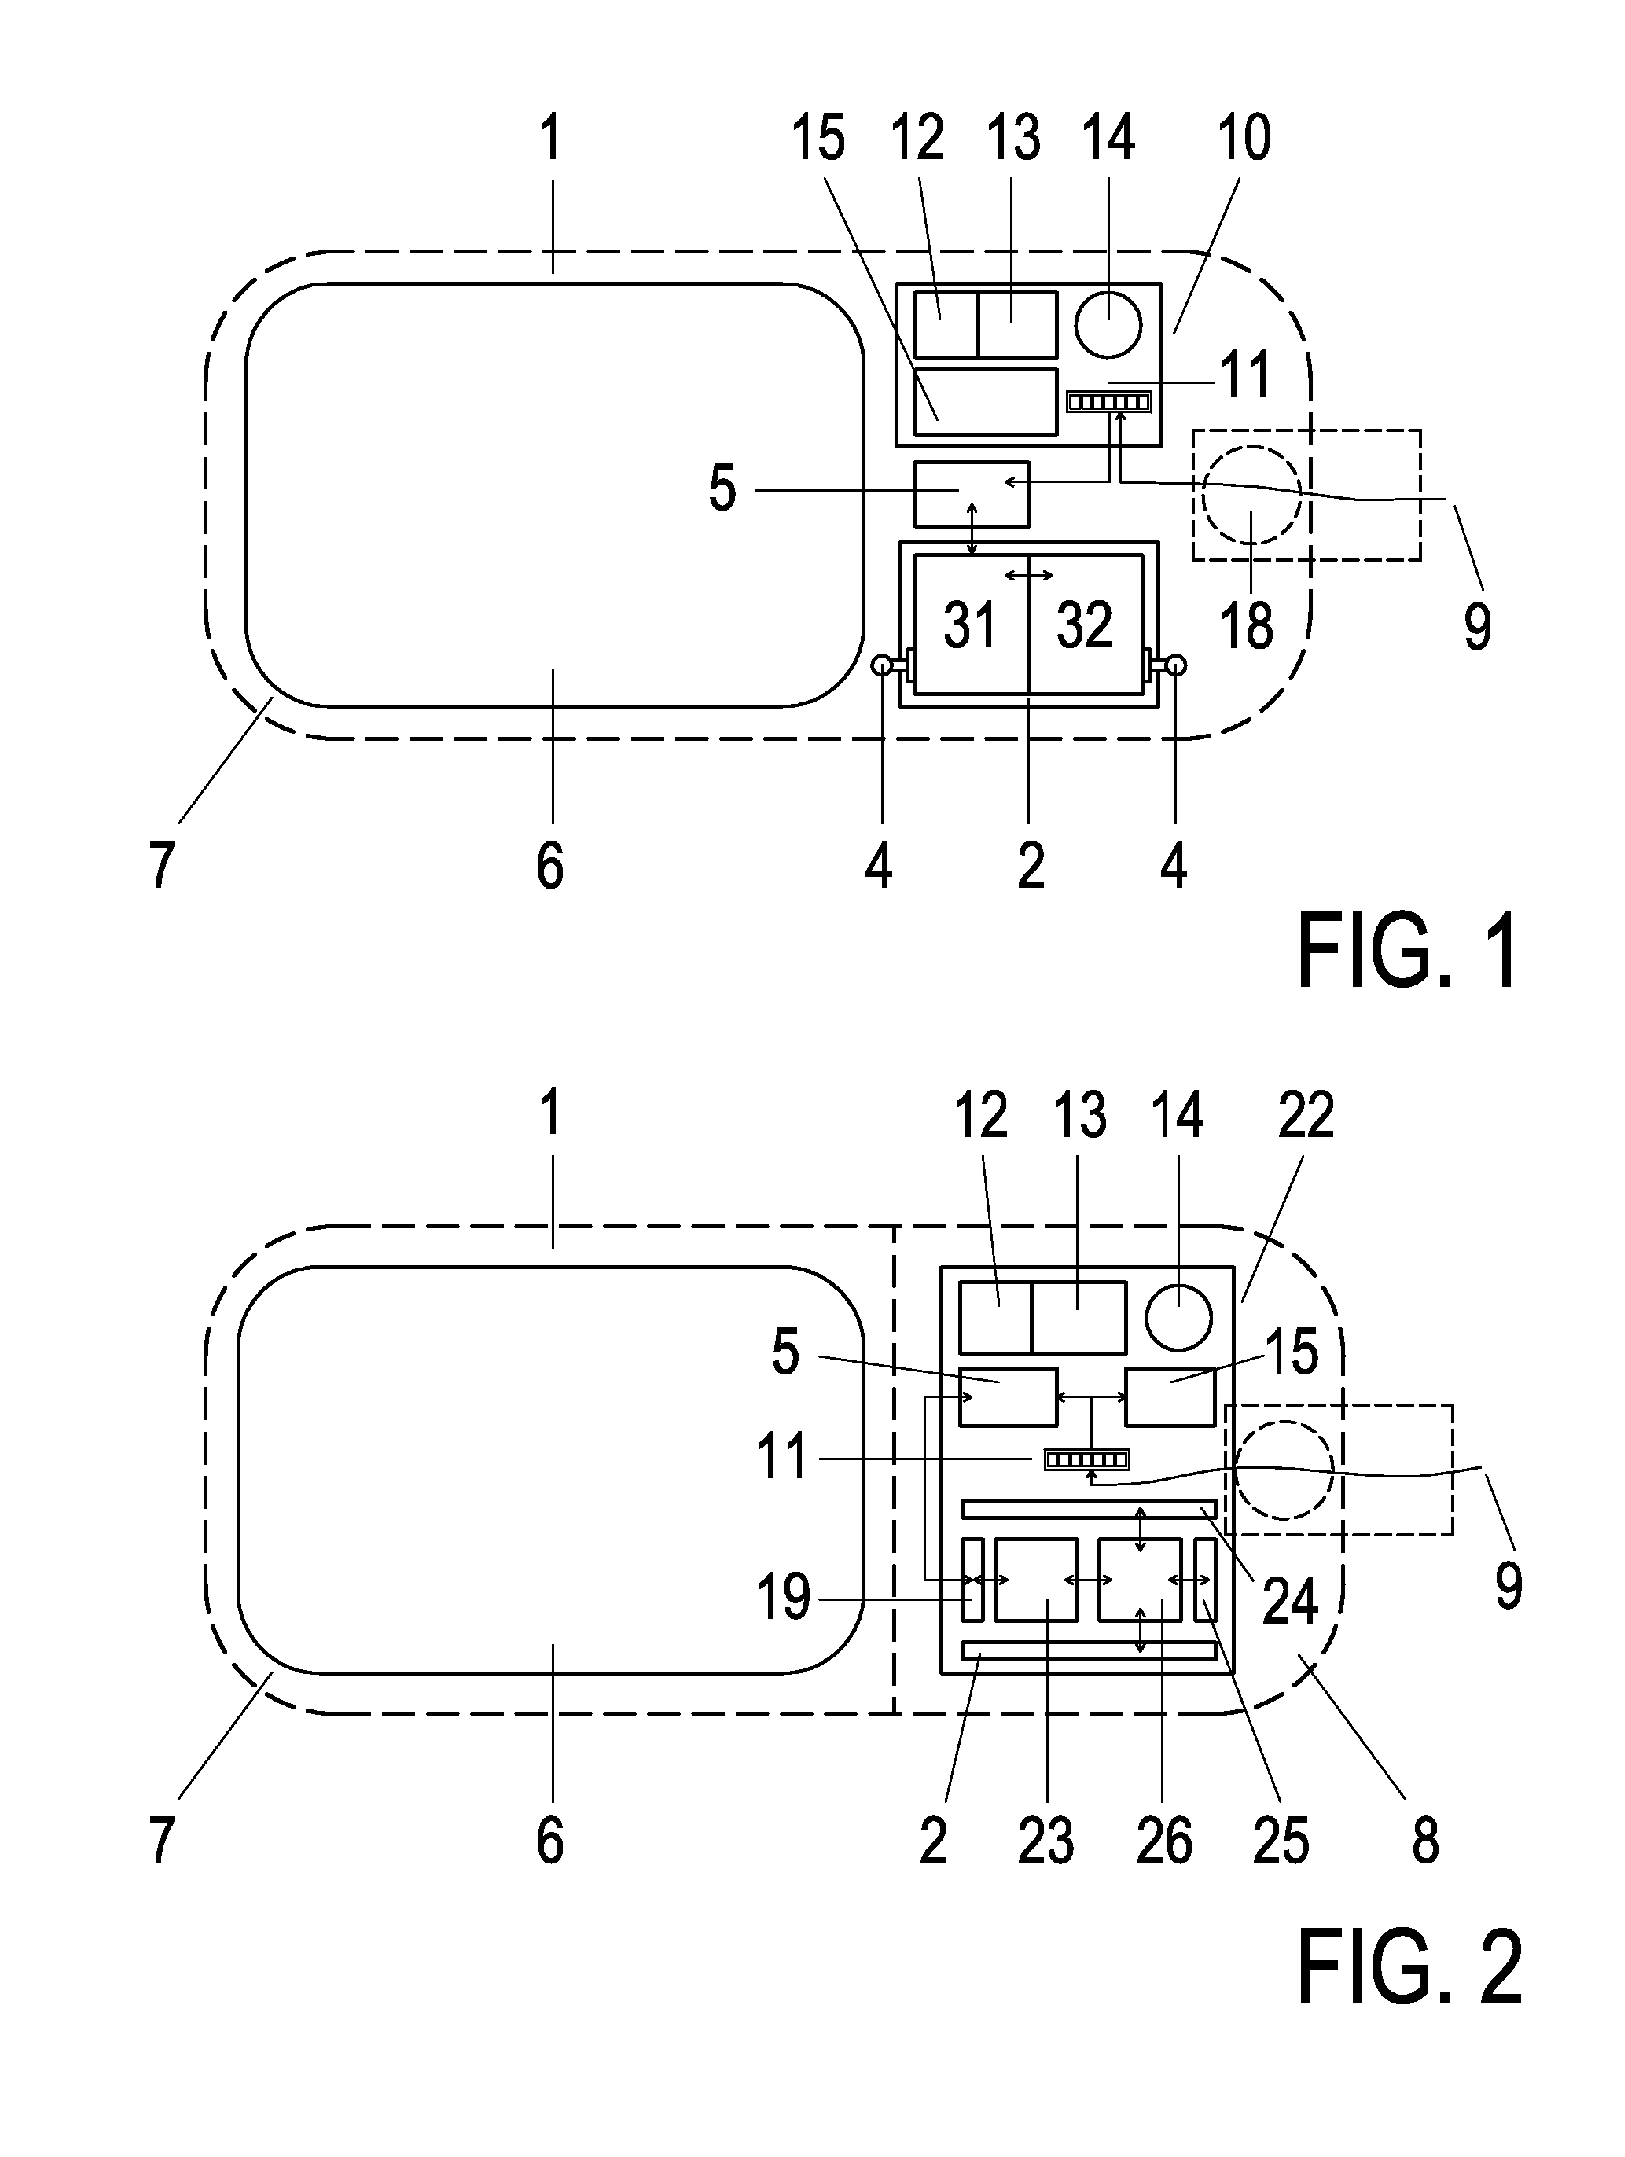 Device and System for Radiofrequency Communication in Urban or Road Environments